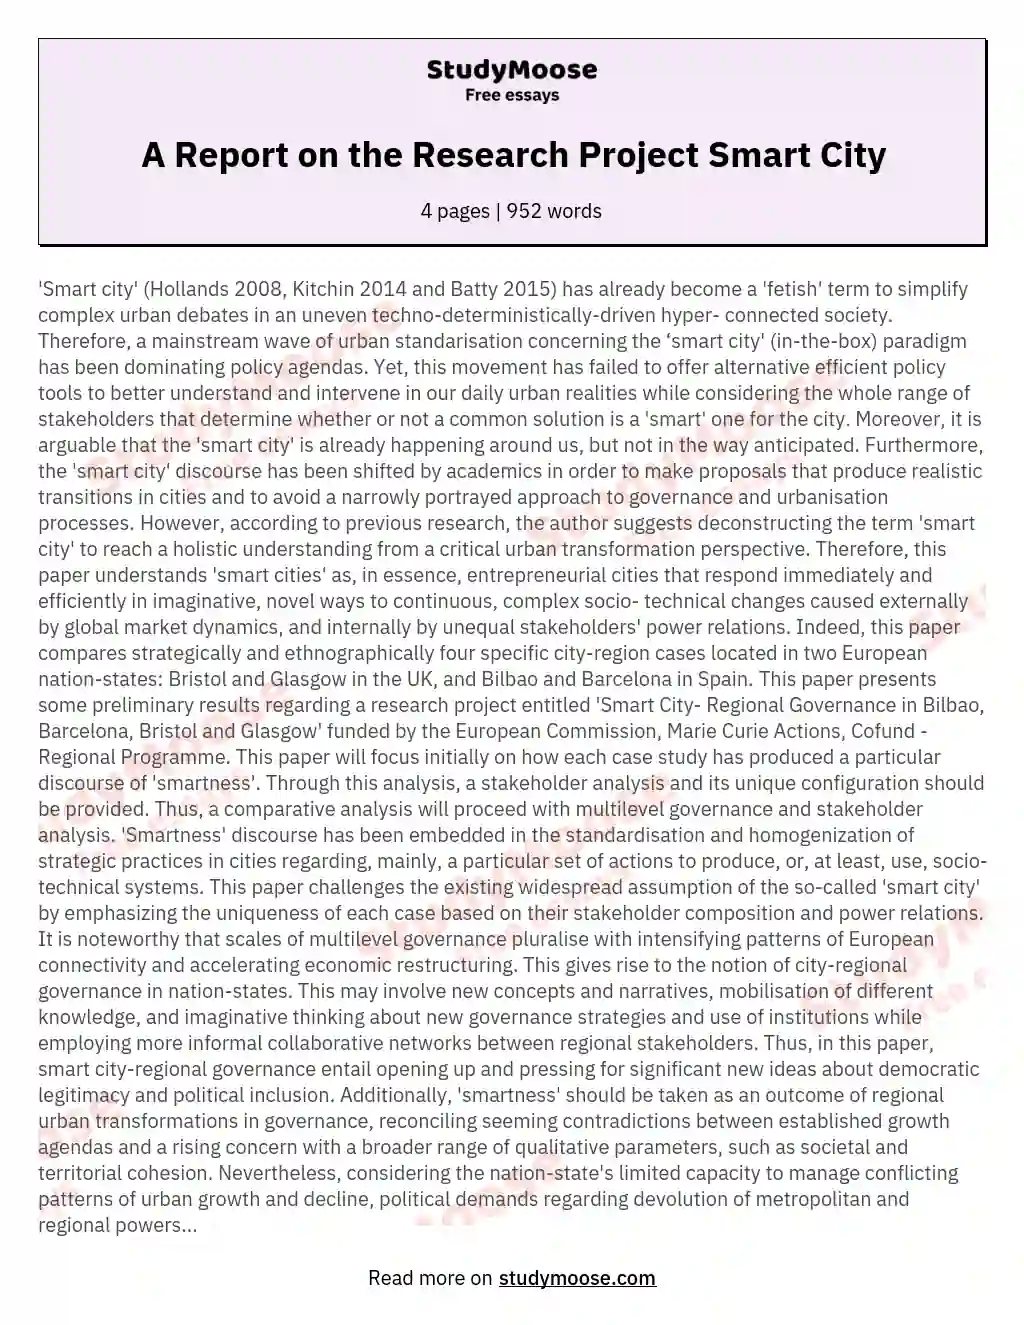 A Report on the Research Project Smart City essay